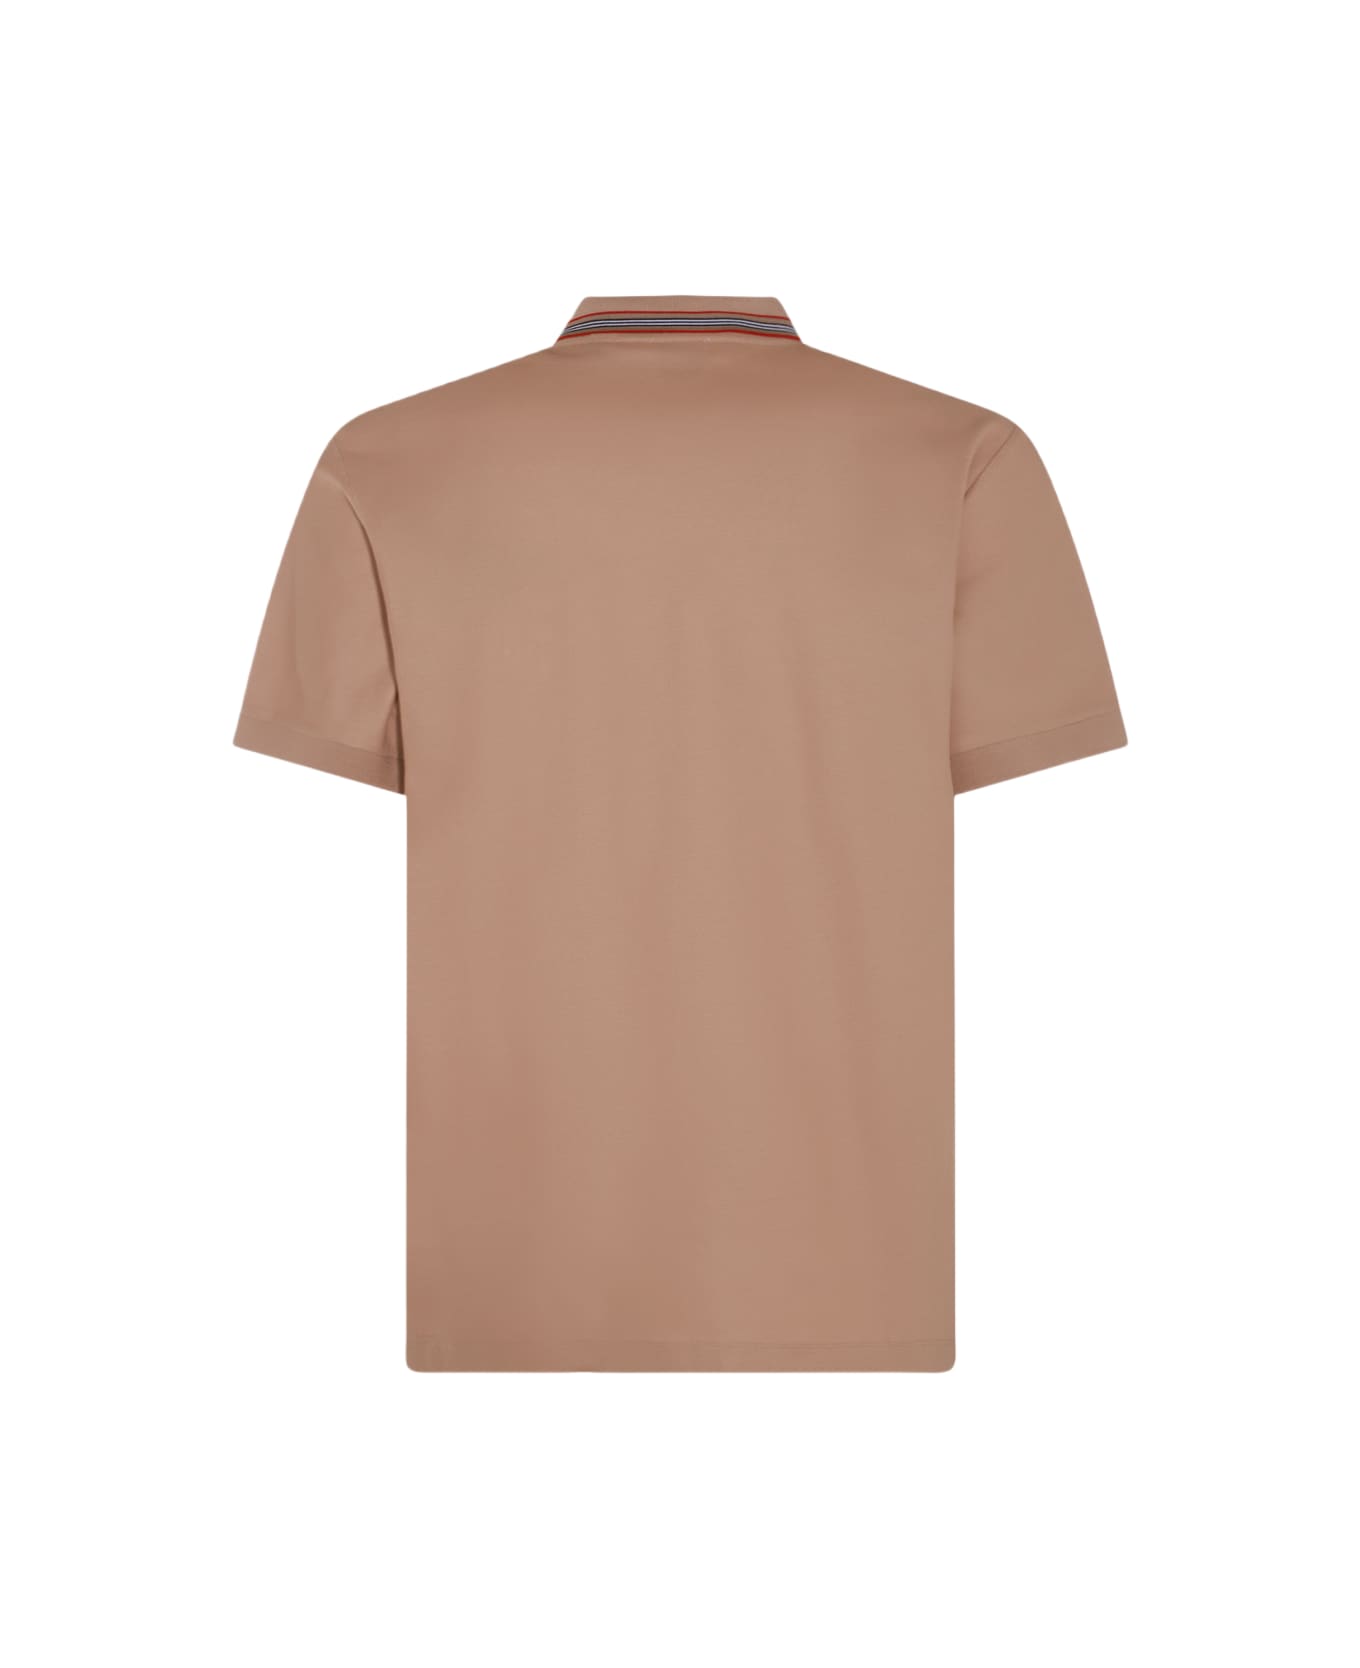 Burberry Beige Cotton Polo Shirt - SOFTFAWN ポロシャツ